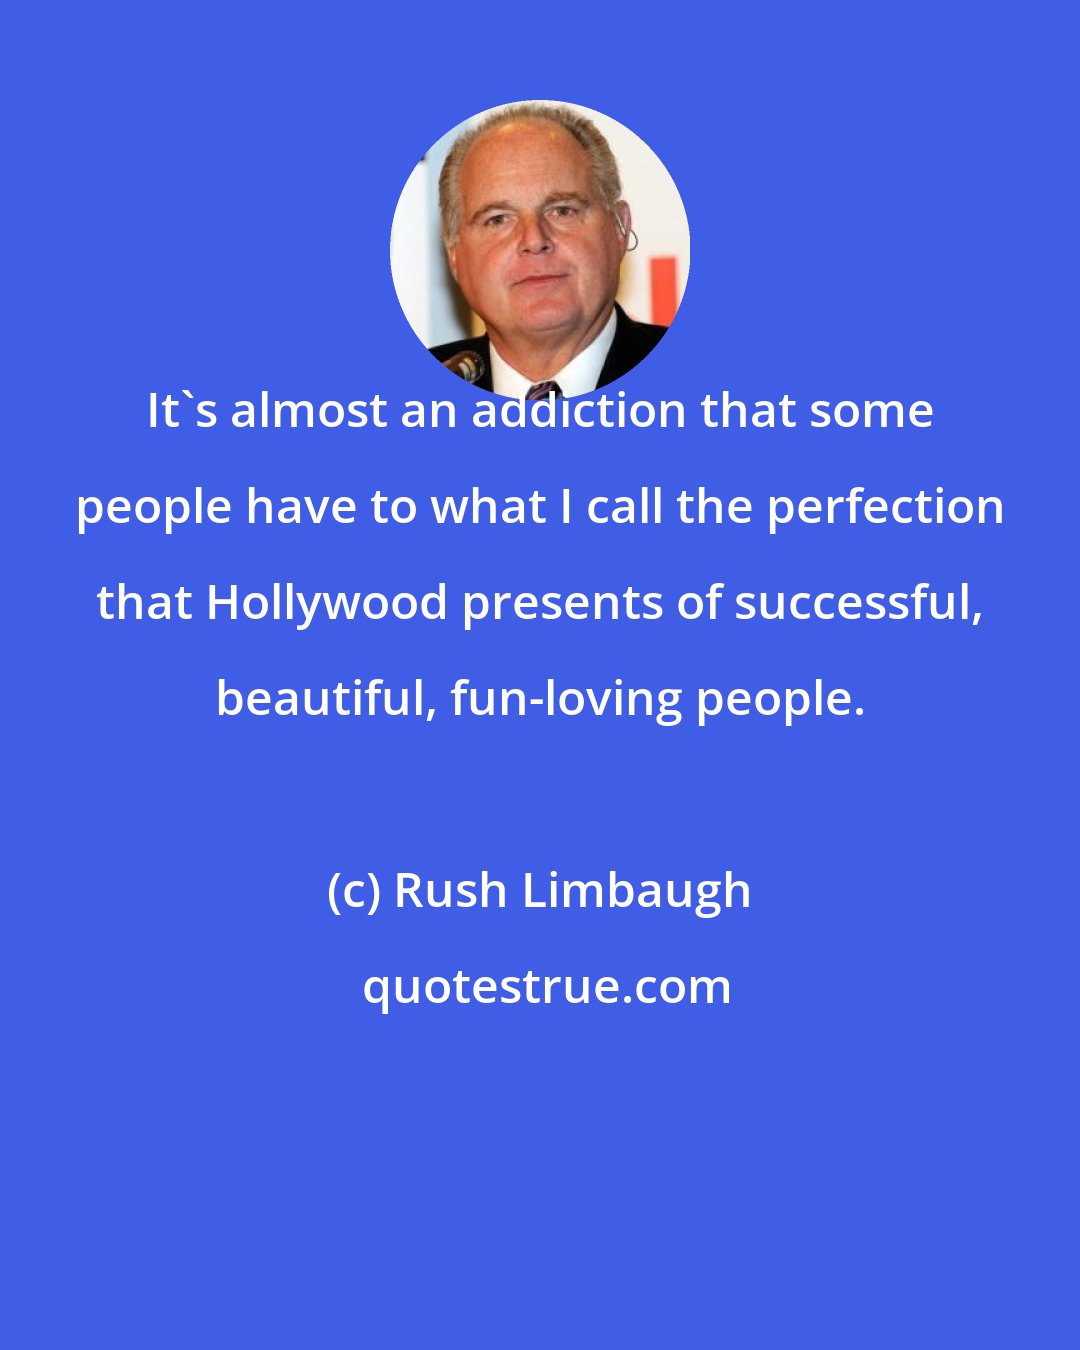 Rush Limbaugh: It's almost an addiction that some people have to what I call the perfection that Hollywood presents of successful, beautiful, fun-loving people.